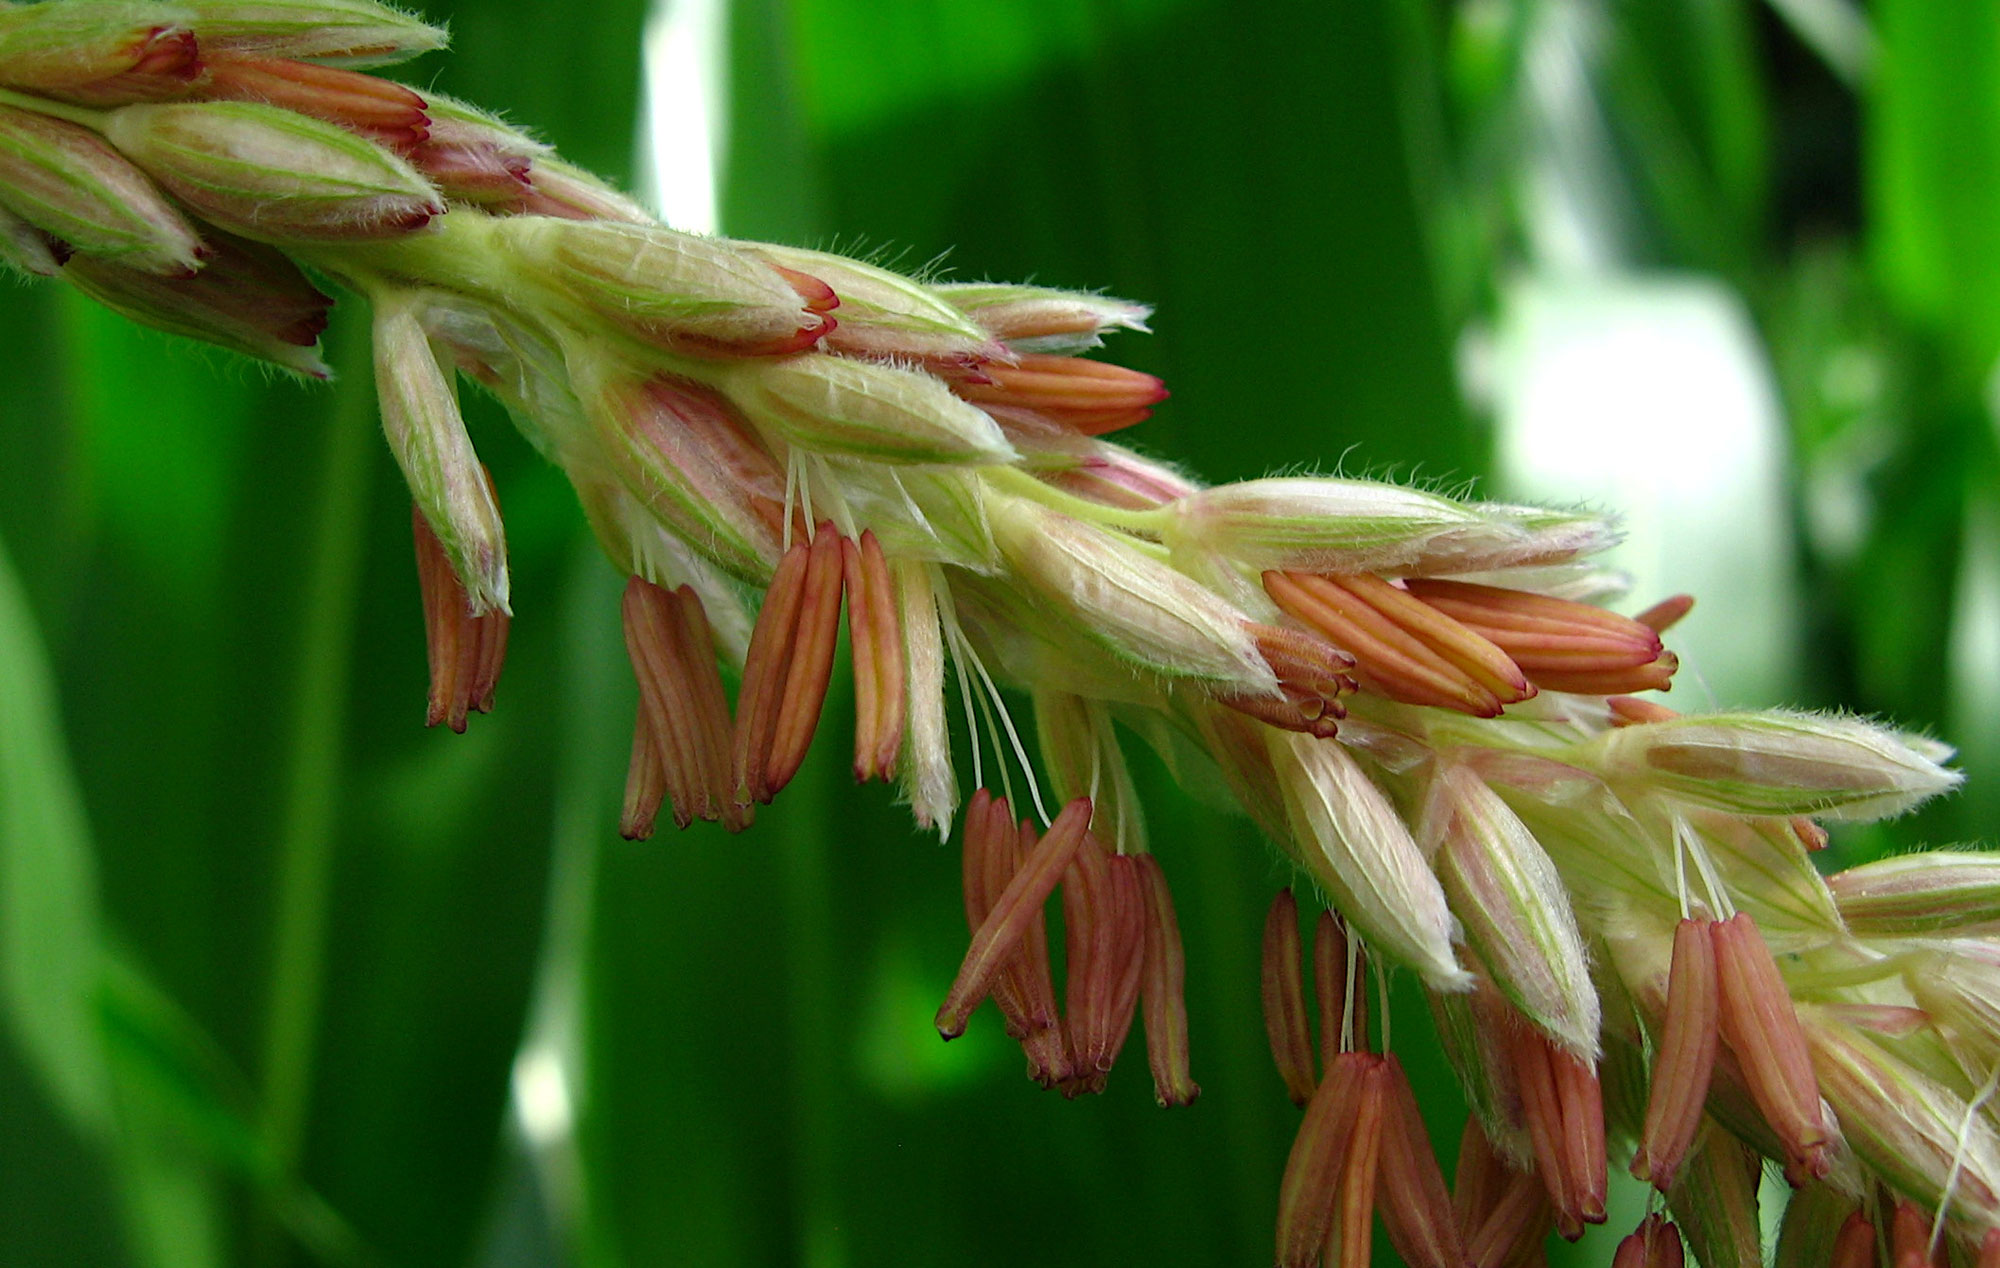 Photograph showing a detail of a portion of the branch of a maize tassel bearing male spikelets. The spikelets have exposed anthers. The anthers are light brownish-orange in color.